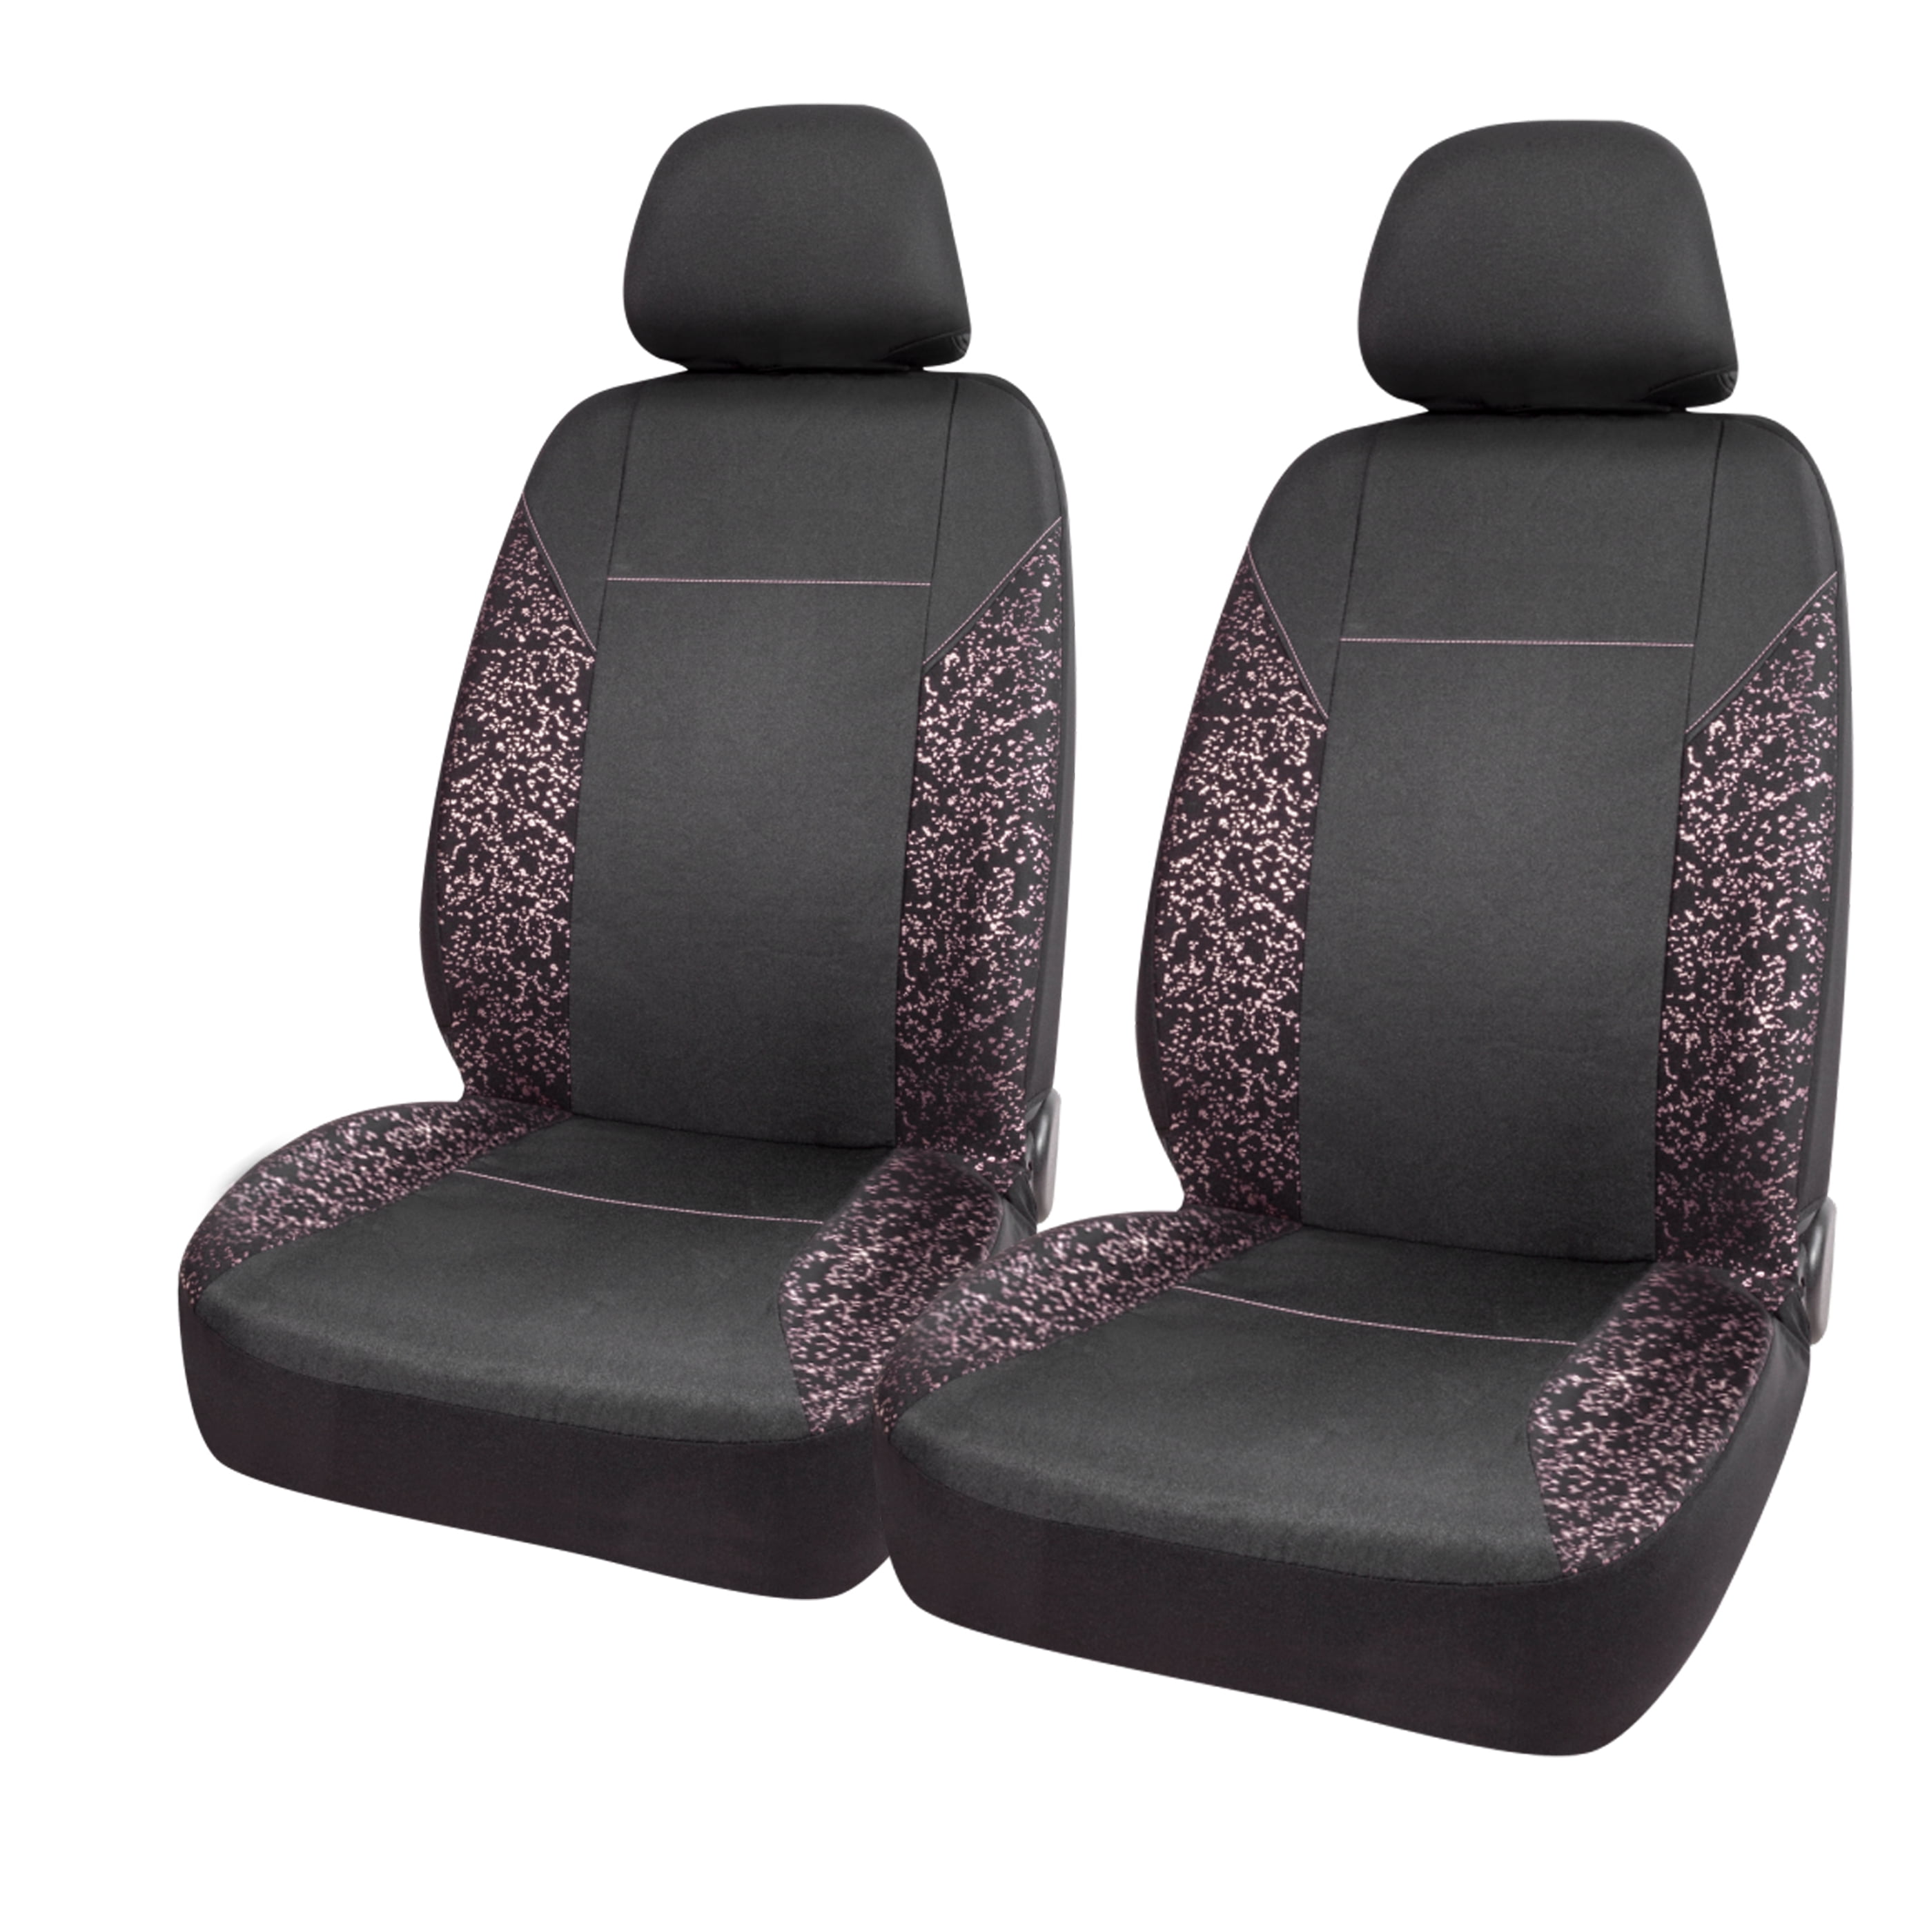 Auto Drive 5 Piece Pink Splatter Seat Cover Kit Polyester Black - Universal Fit, 1903SC91